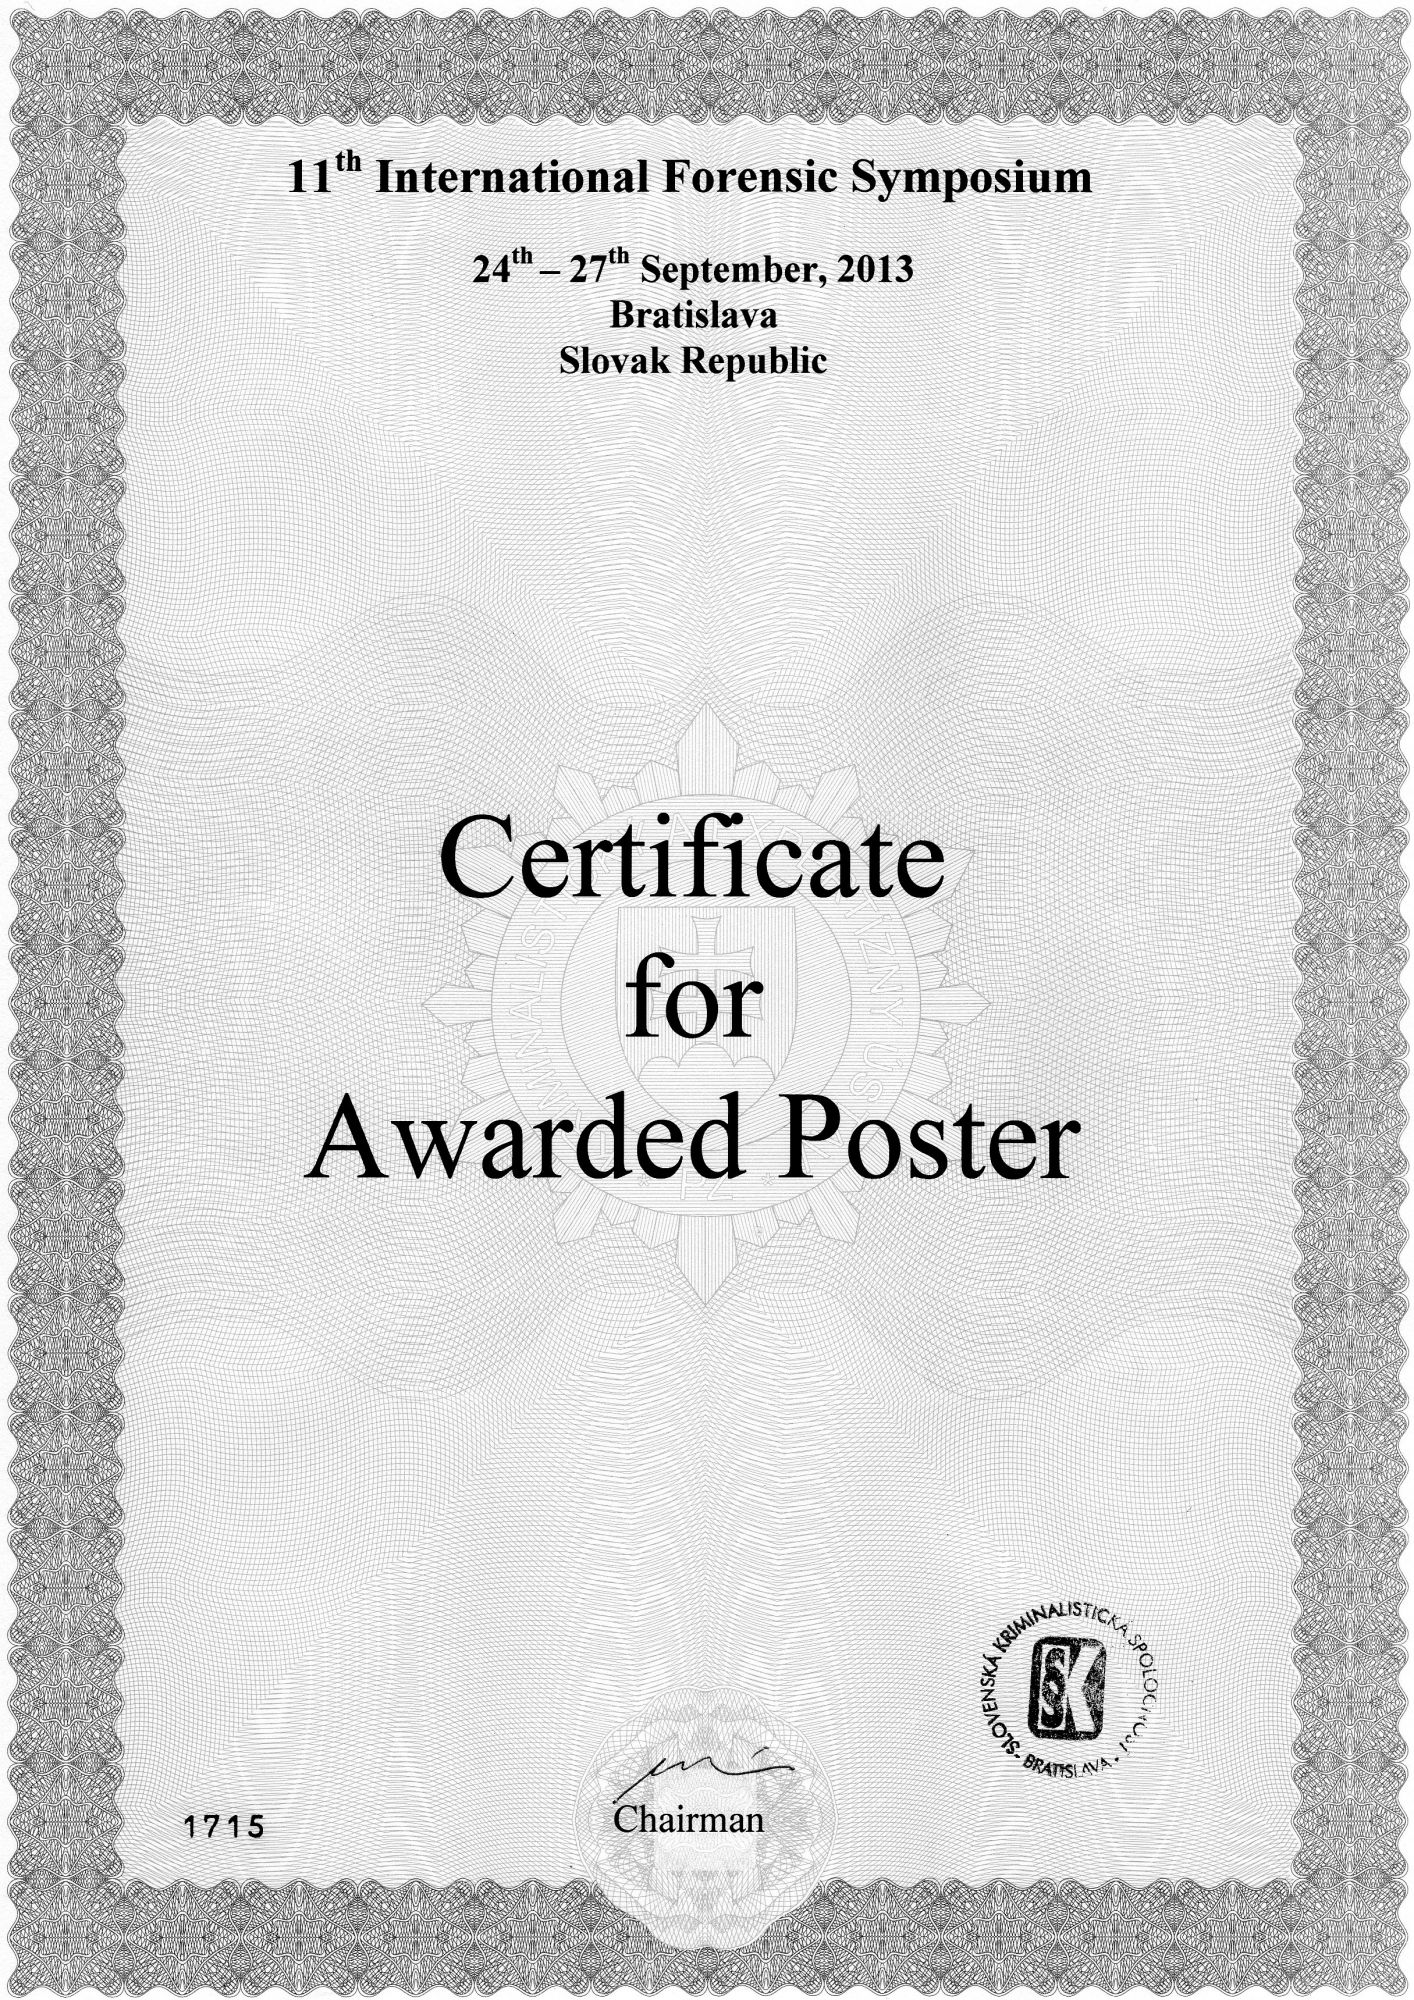 Certificate for awarded poster